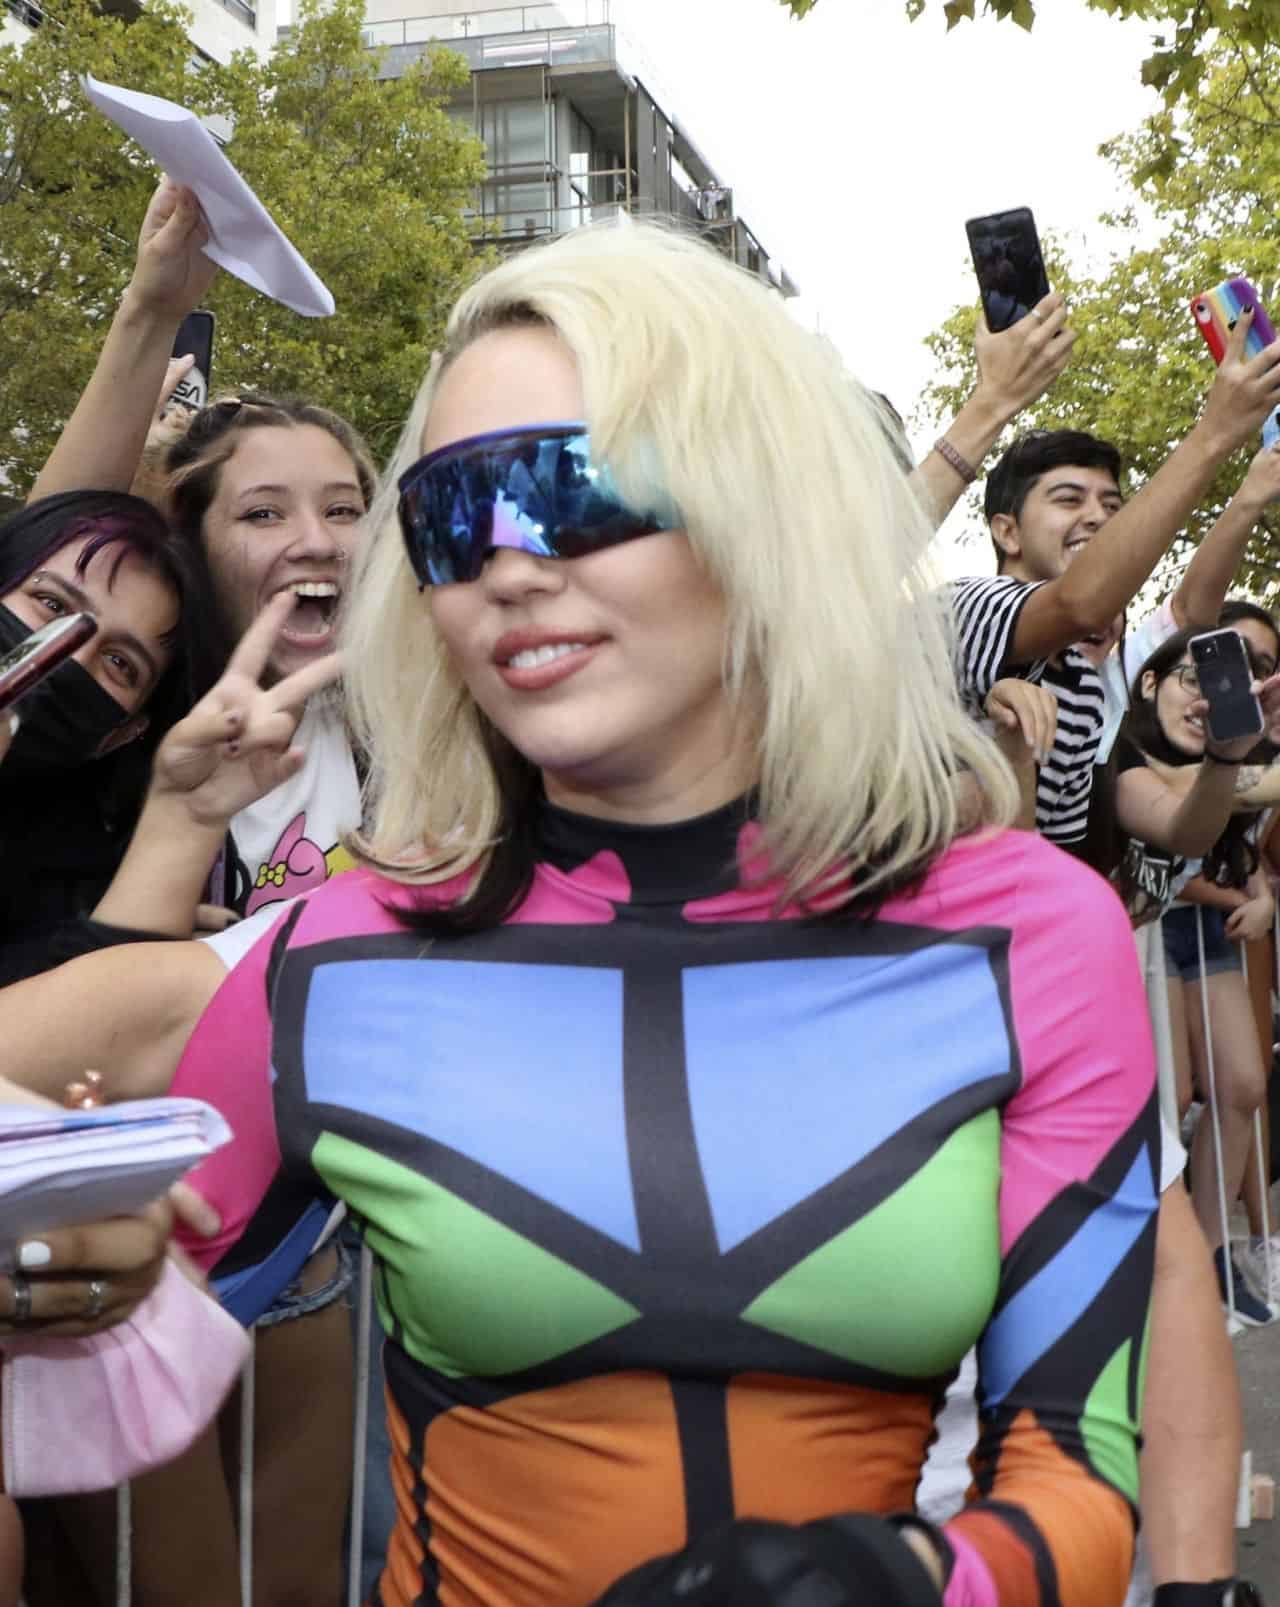 Miley Cyrus Looks Fantastic in a Bodysuit as She Greets Fans in Argentina